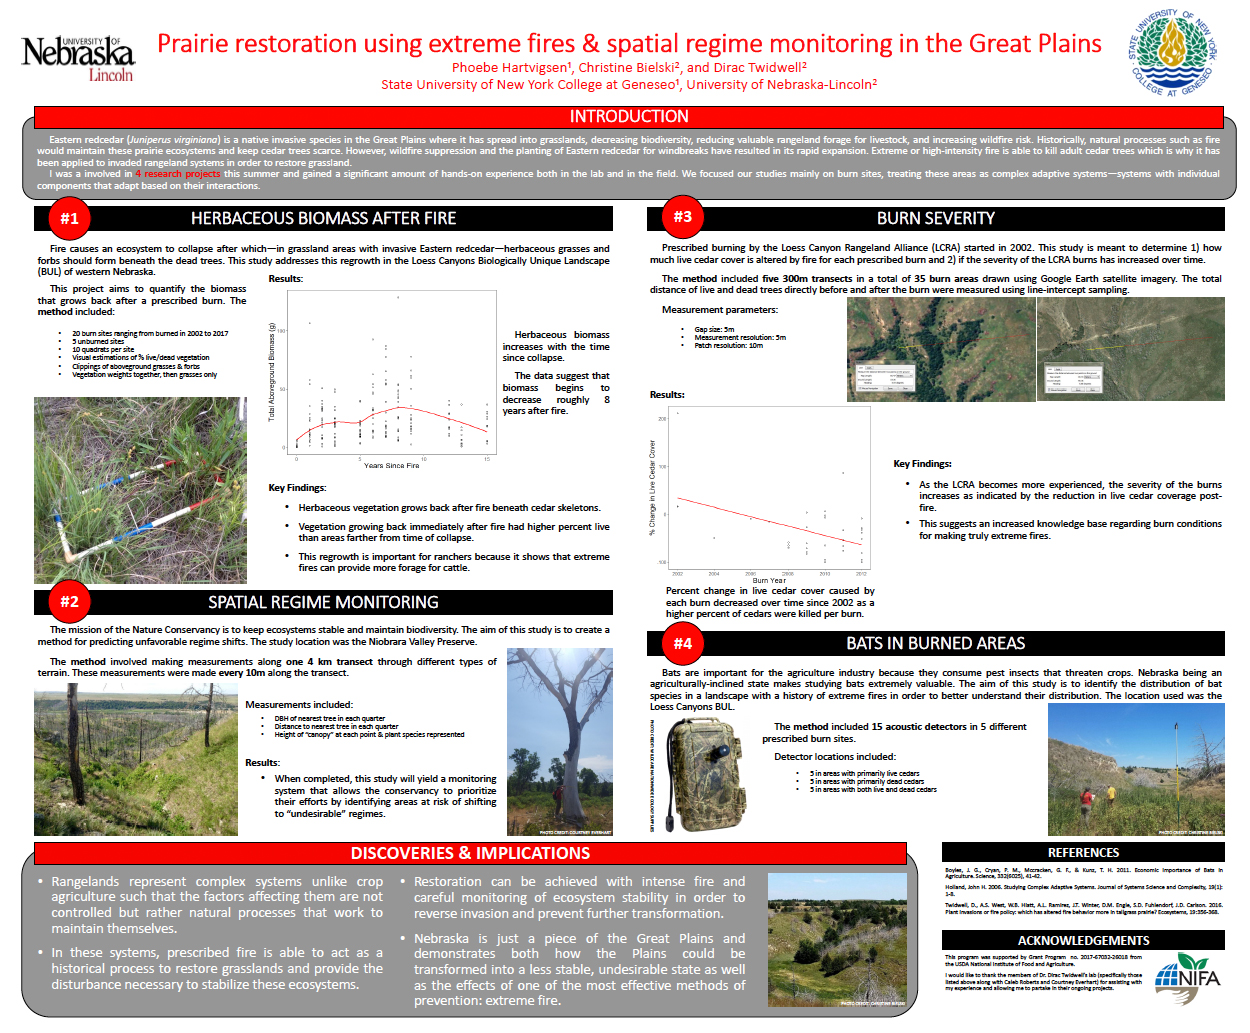 Prairie restoration using extreme fires & spatial regime monitoring in the Great Plains poster